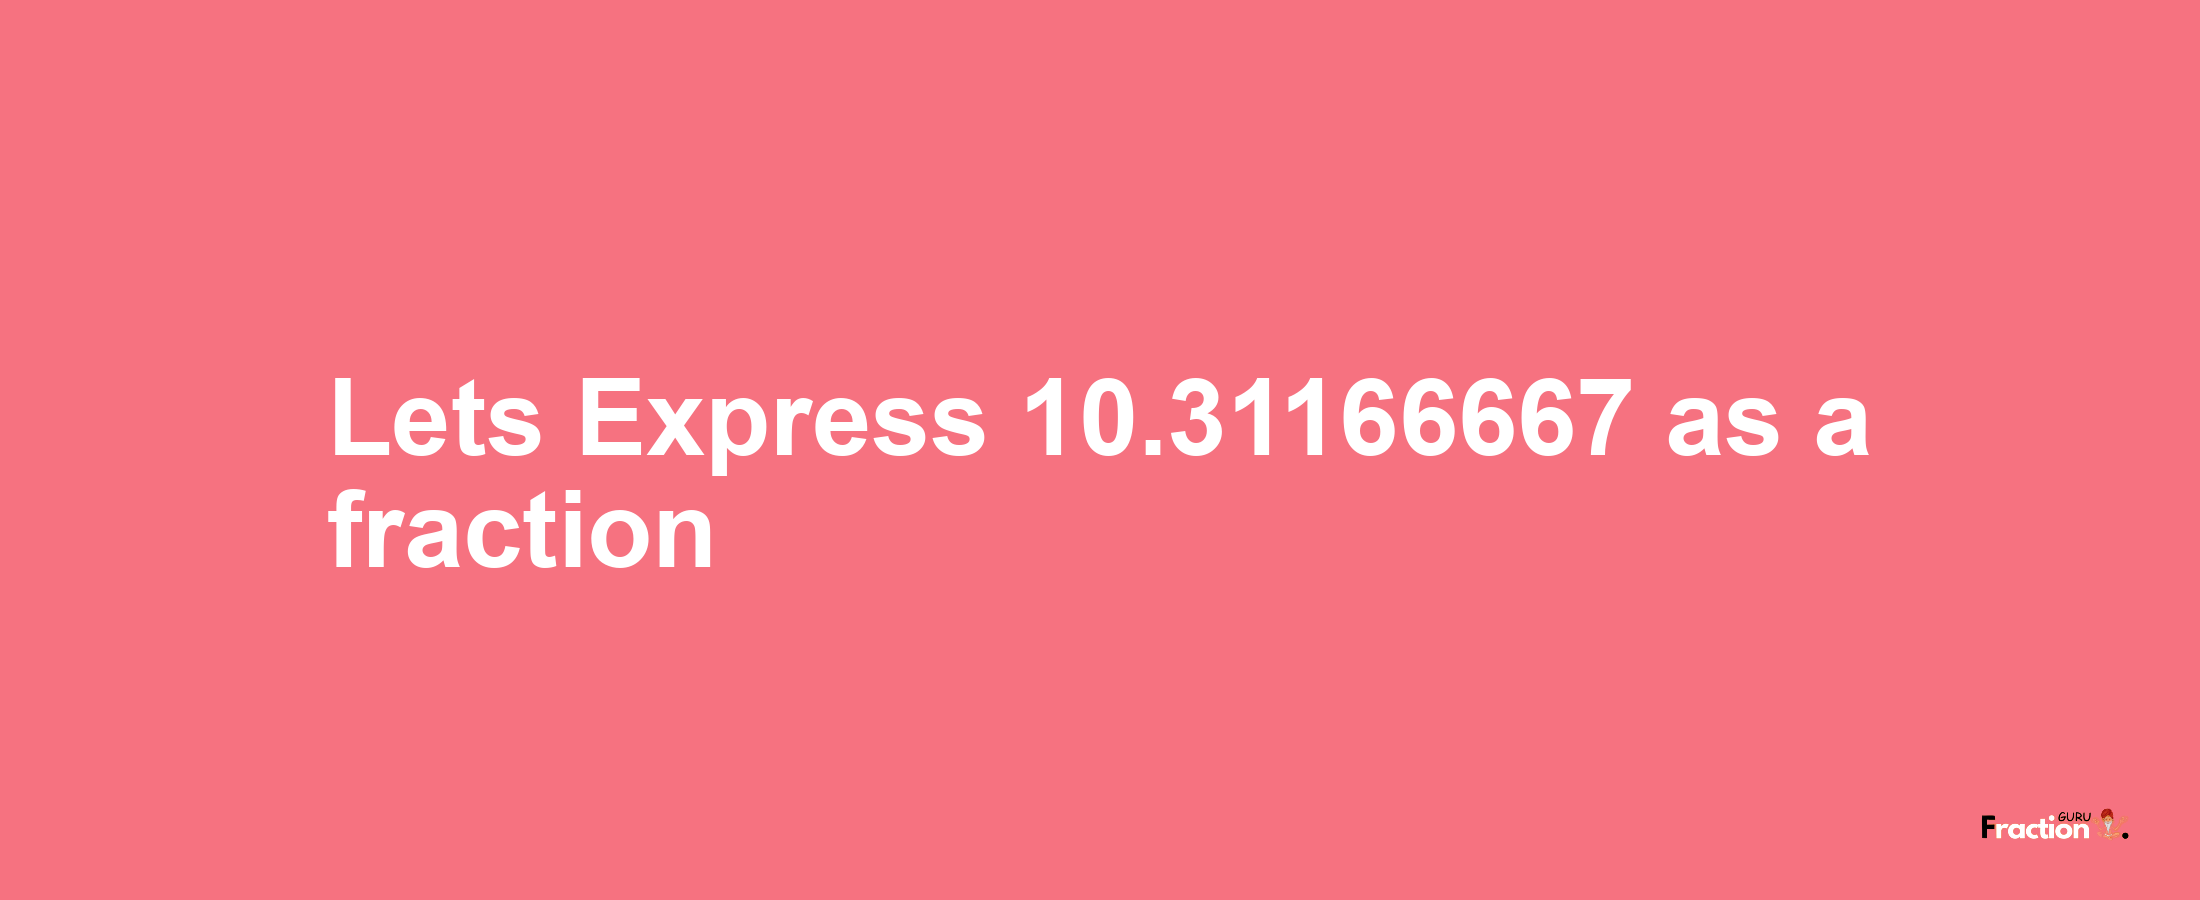 Lets Express 10.31166667 as afraction